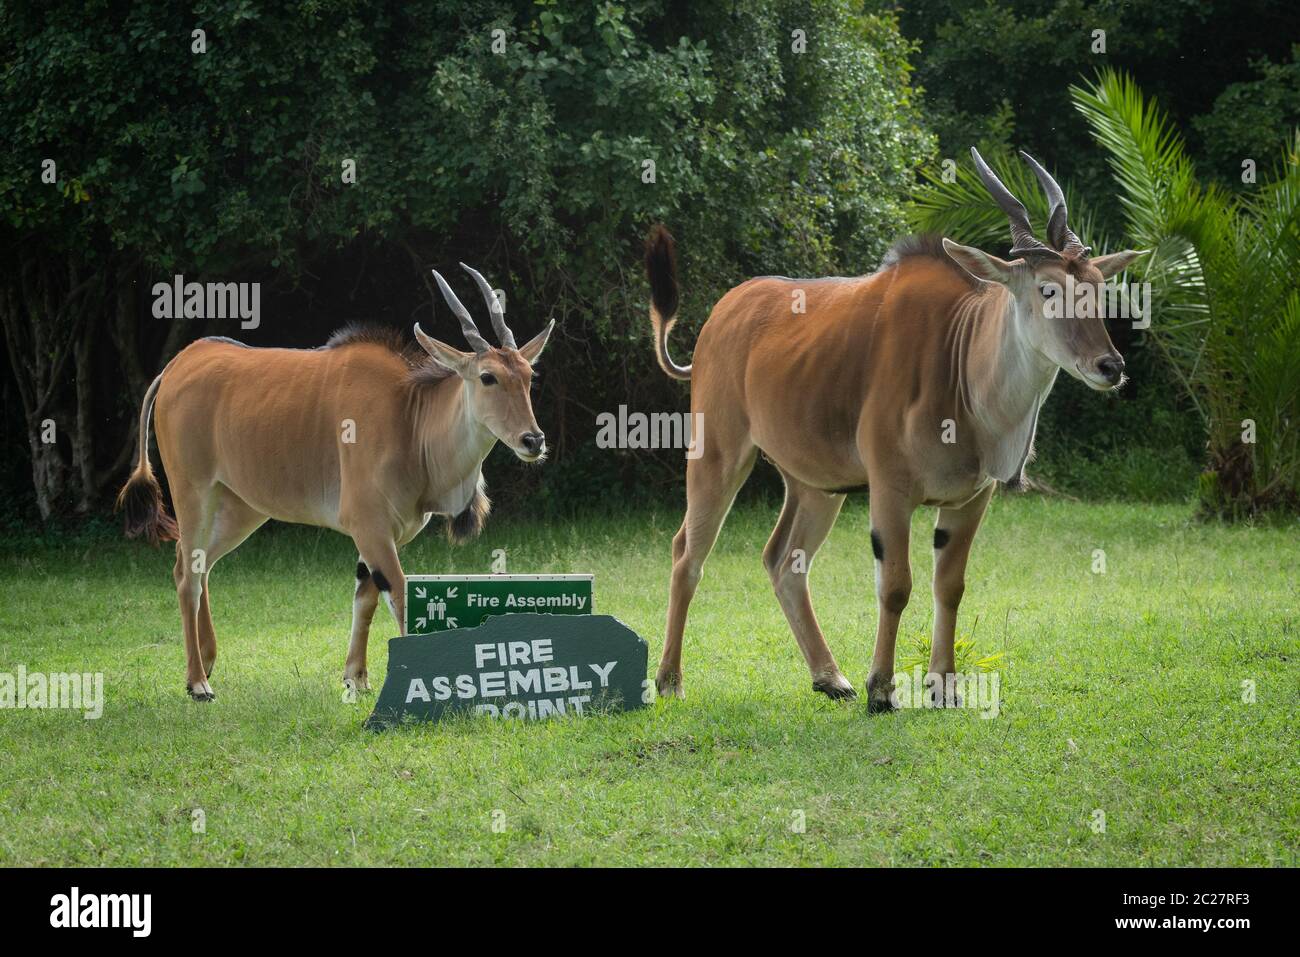 Two eland stand by sign on grass Stock Photo